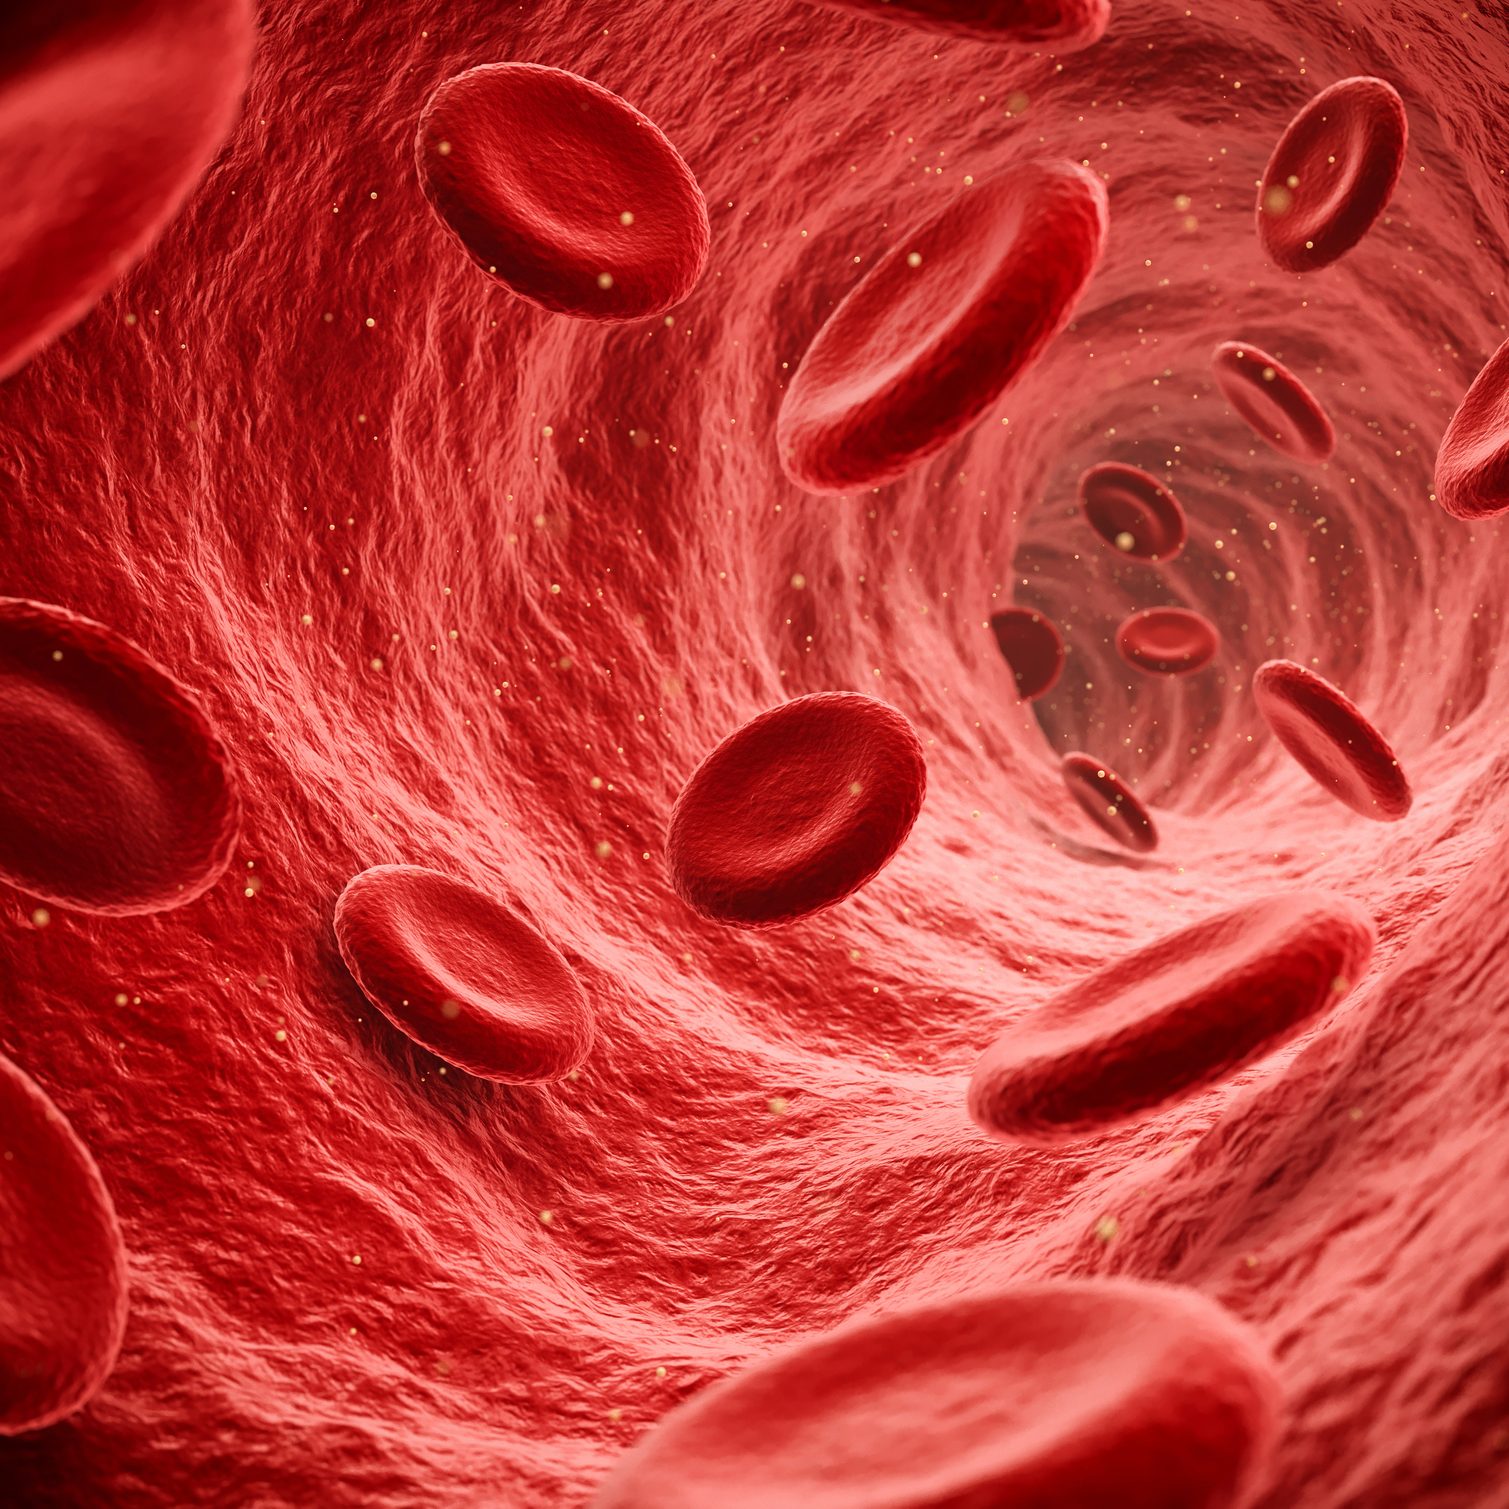 Red Blood Cells Flowing Through The Blood Stream